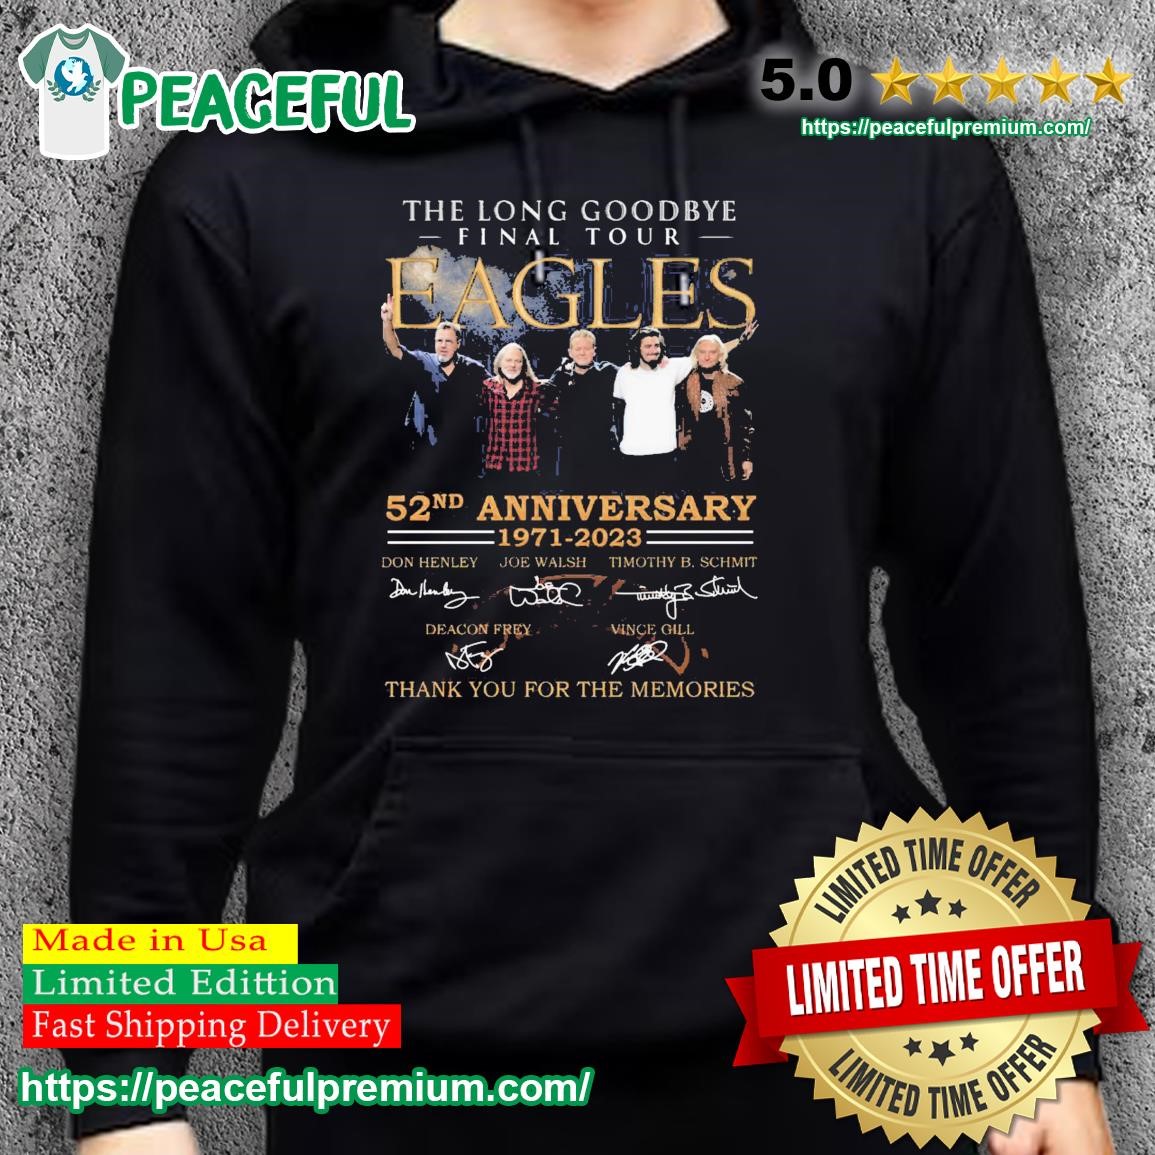 Eagles Band The Long Goodbye Final Tour 52nd Anniversary 1971-2023 Thank You For The Memories Shirt hoodie.jpg